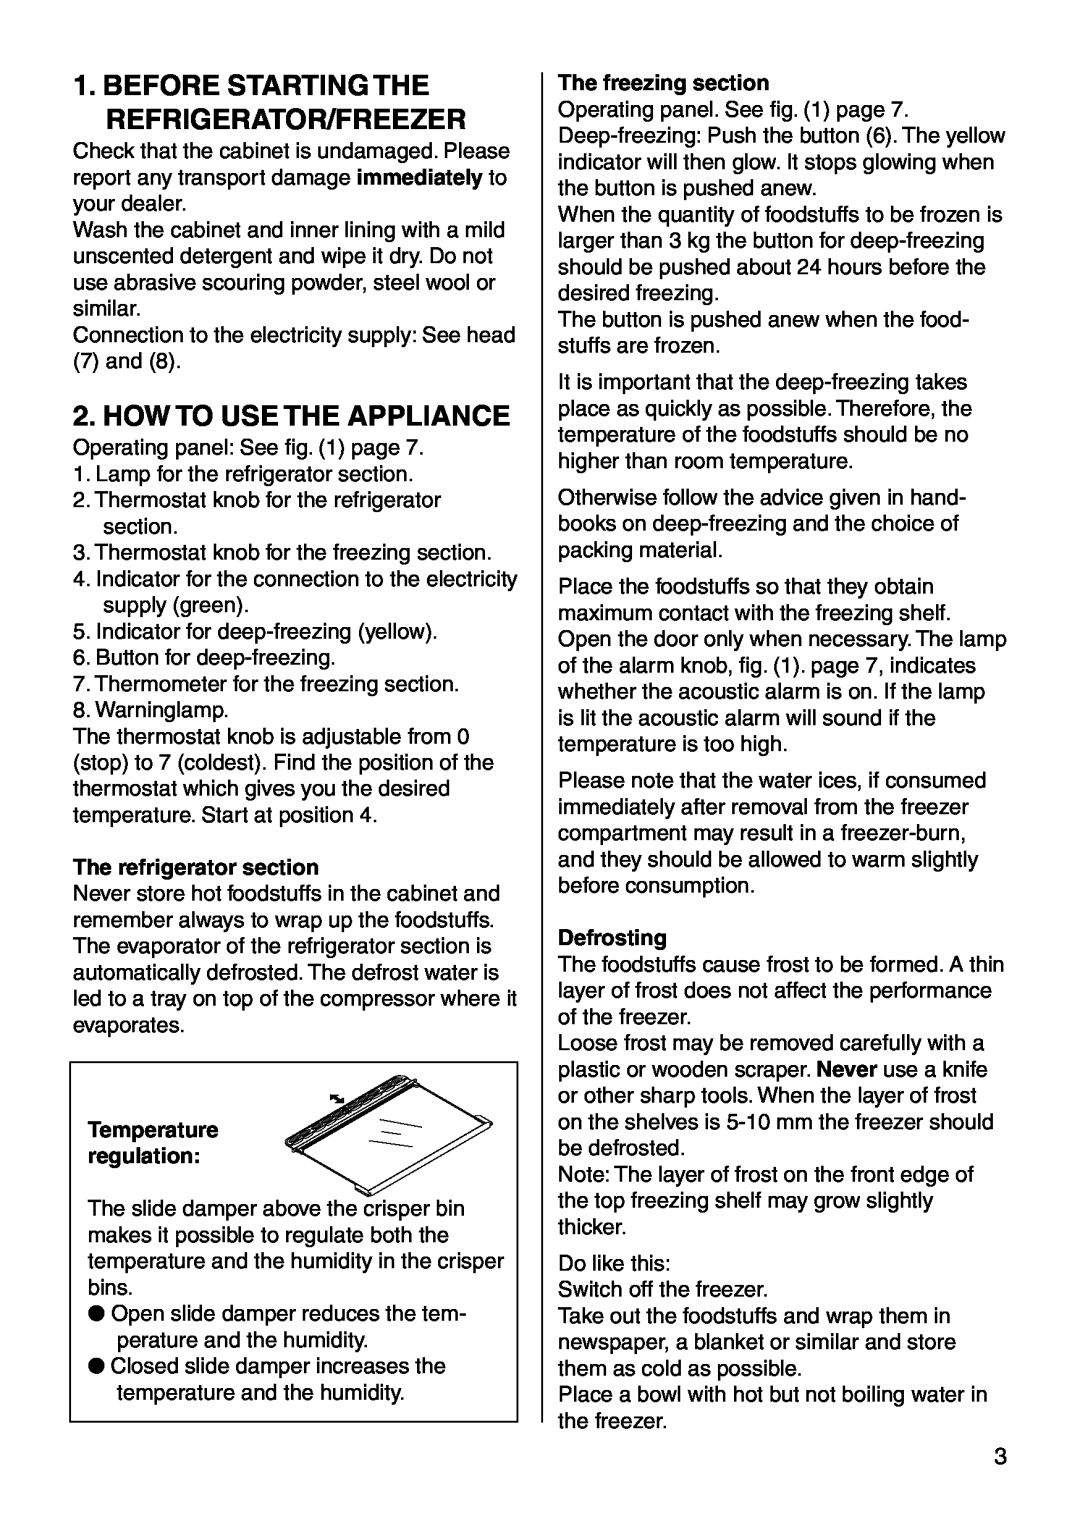 Smeg UKFC40RX3 How To Use The Appliance, Before Starting The Refrigerator/Freezer, The refrigerator section, Defrosting 